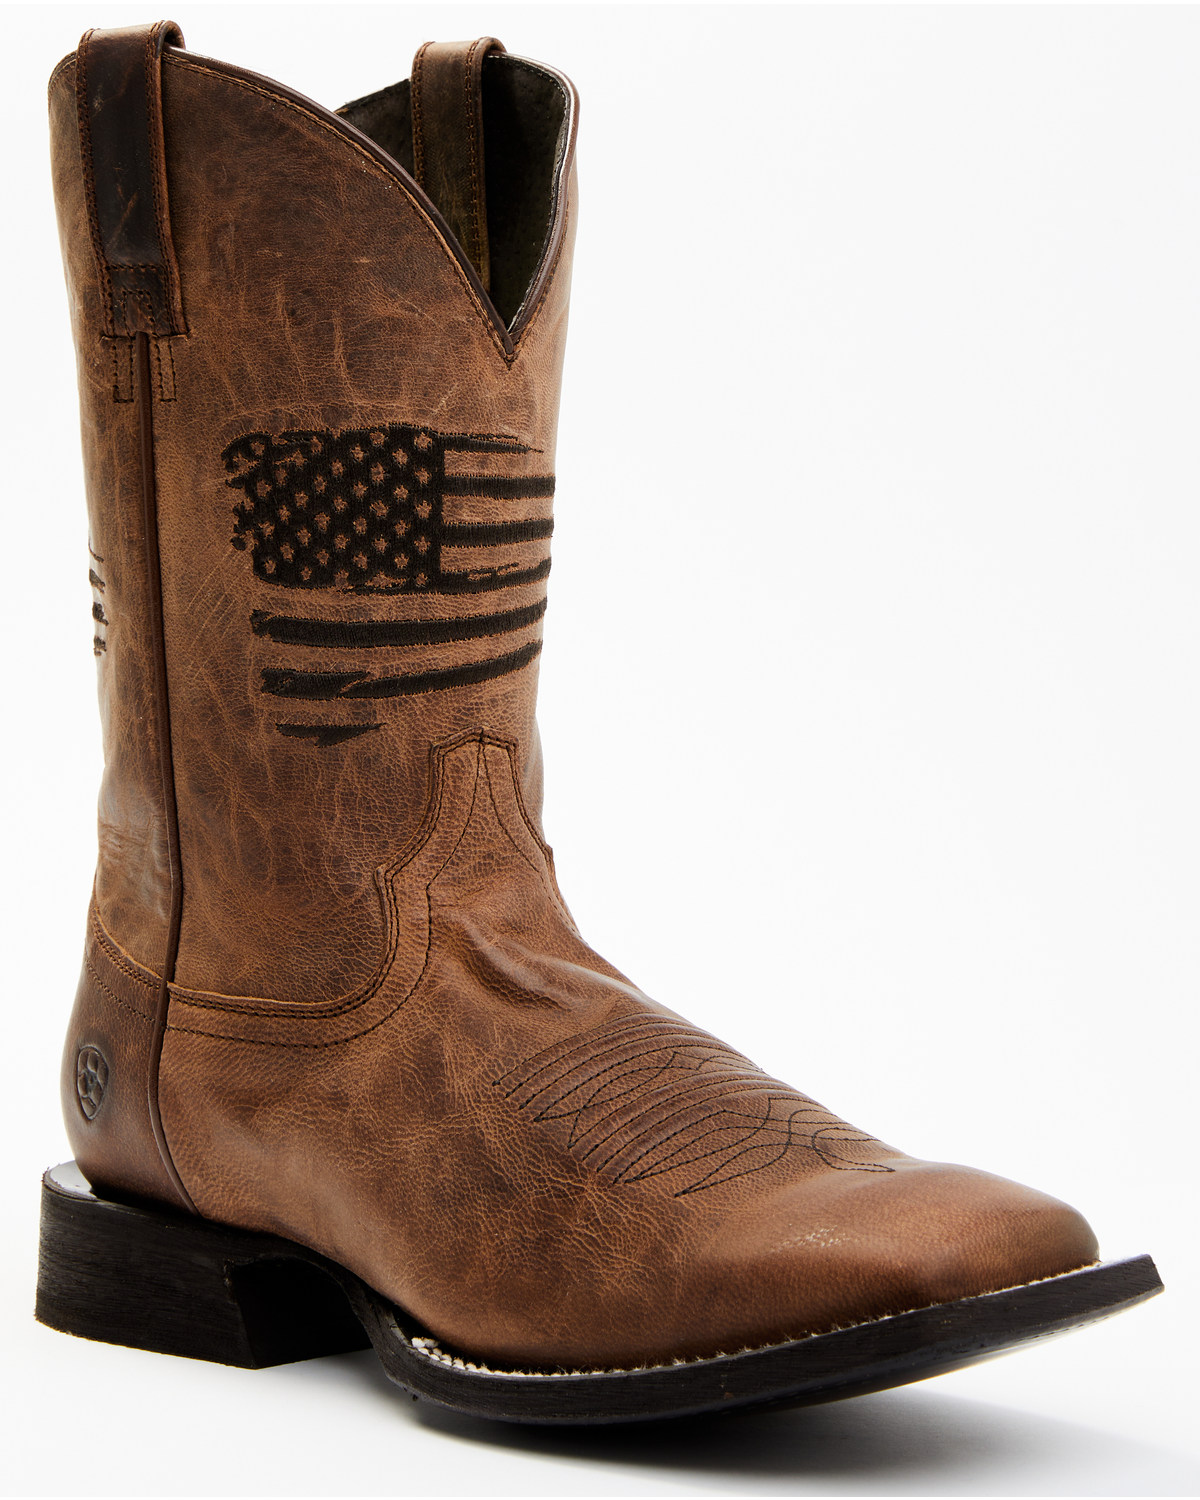 Ariat Men's Circuit Patriot Western Boots - Weathered Tan